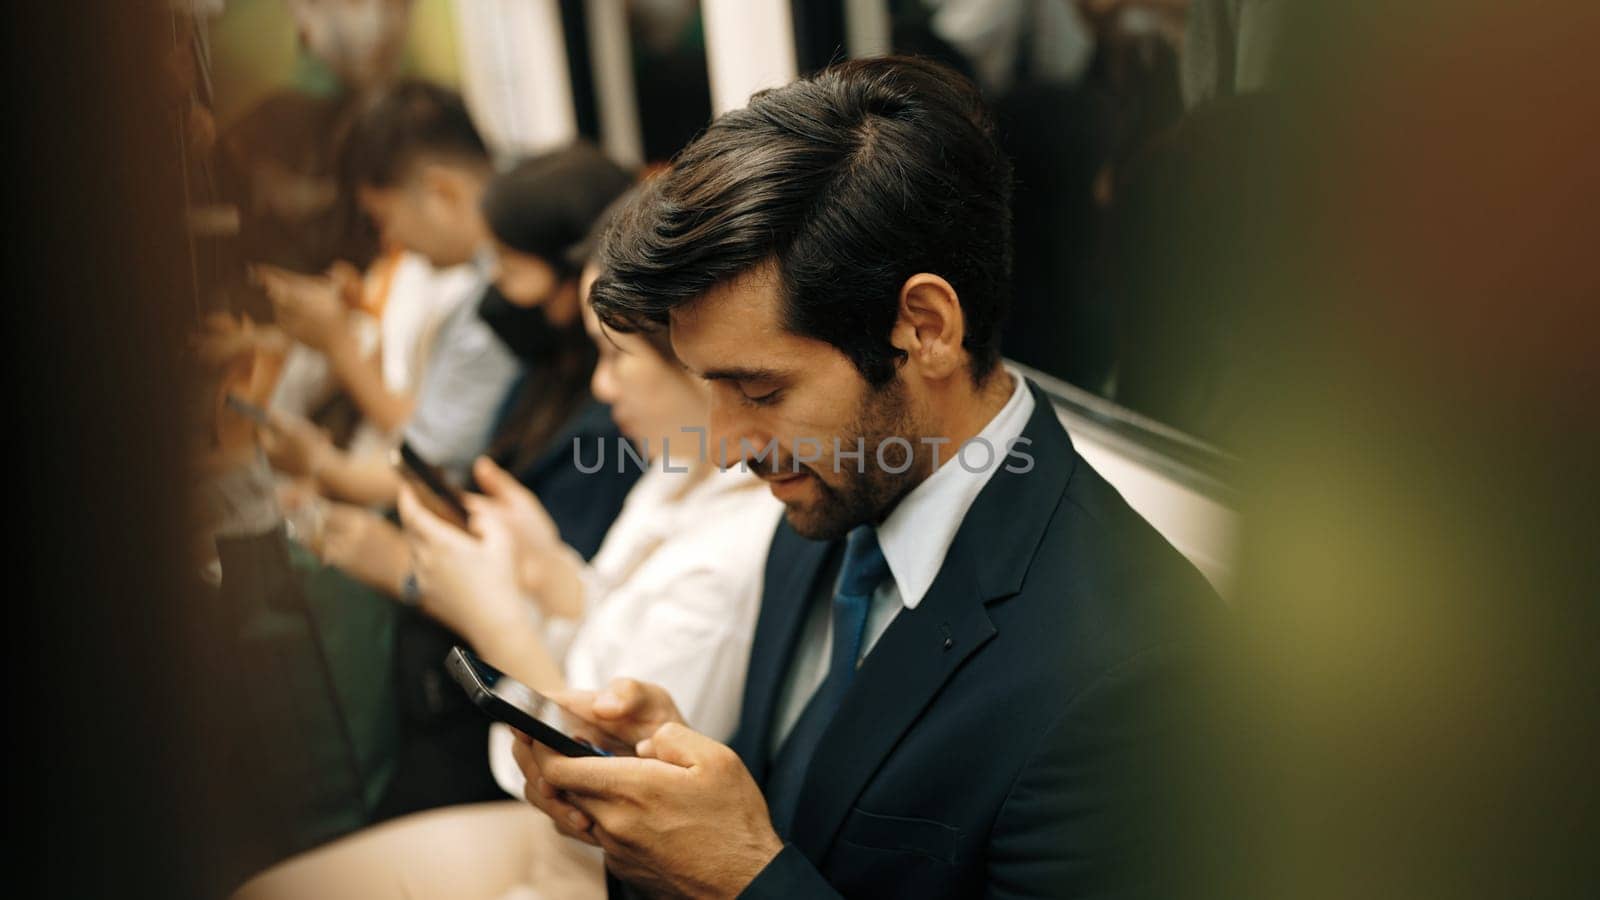 Smiling business man looking at mobile phone while sitting in train. Exultant. by biancoblue